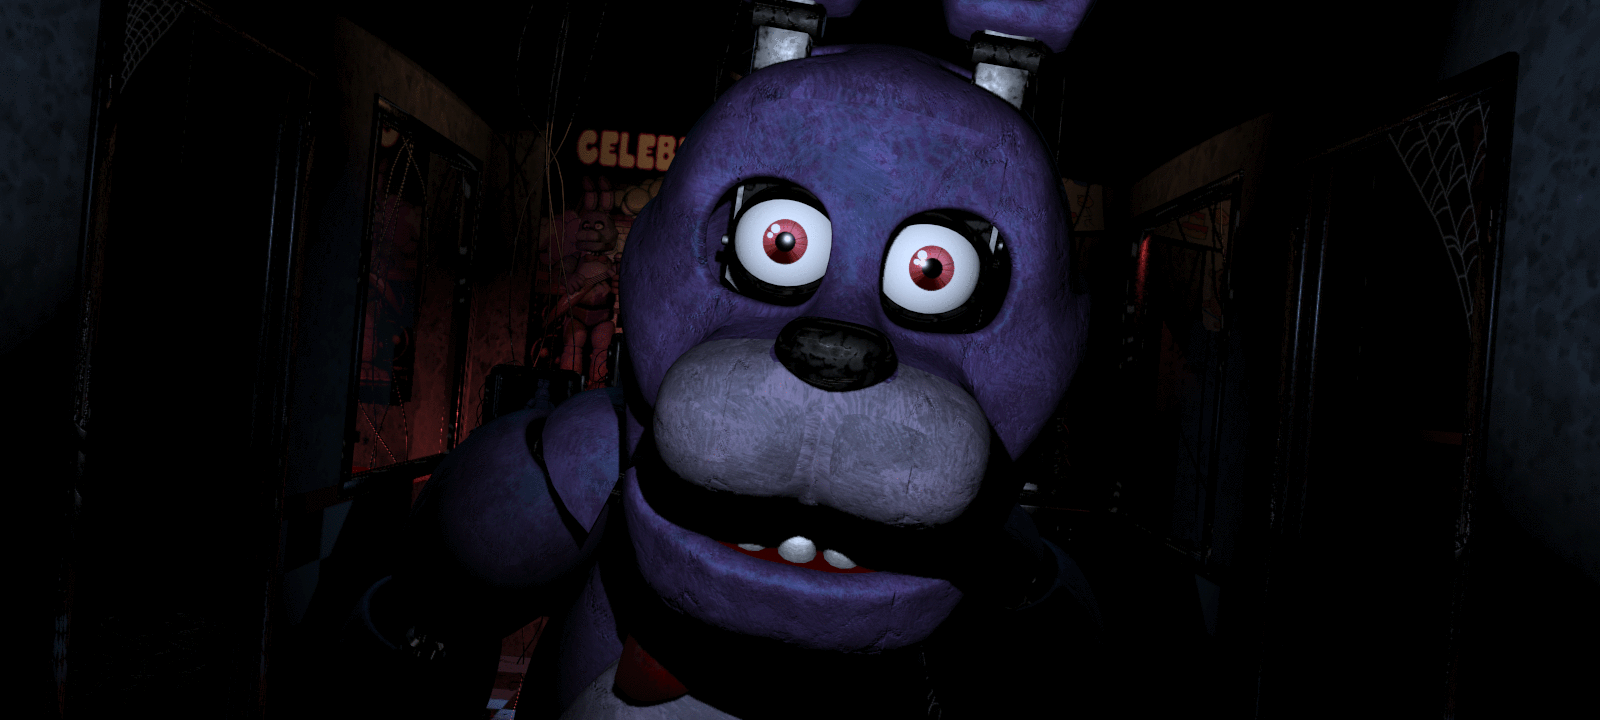 Five Nights At Freddy's Horrific Animatronics To Explore A New Genre Next  Year - Game Informer